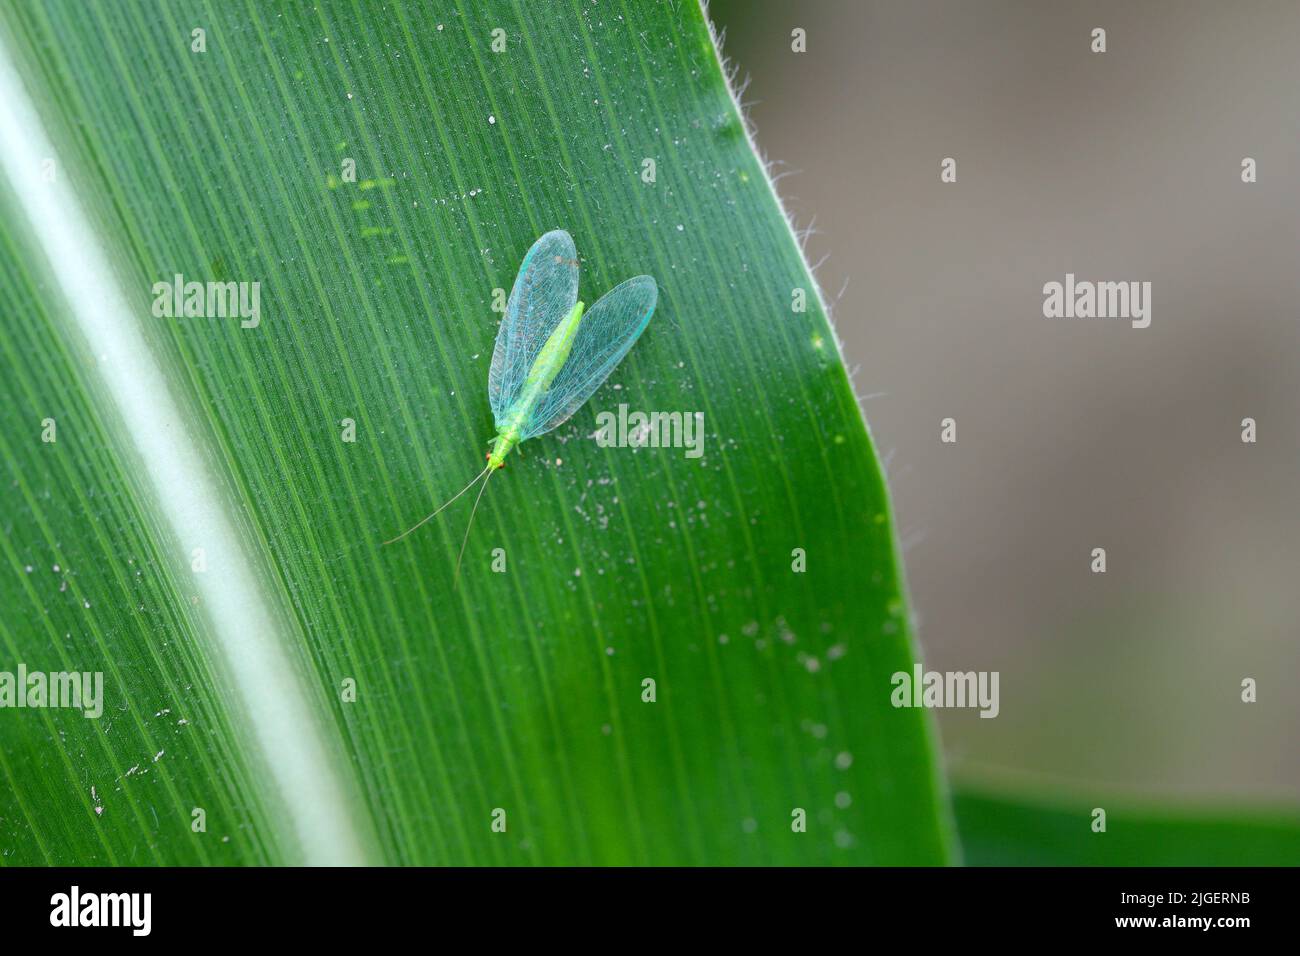 Green Lacewing Chrysopa perla. A natural enemy of pests. An insect on a corn leaf. Stock Photo